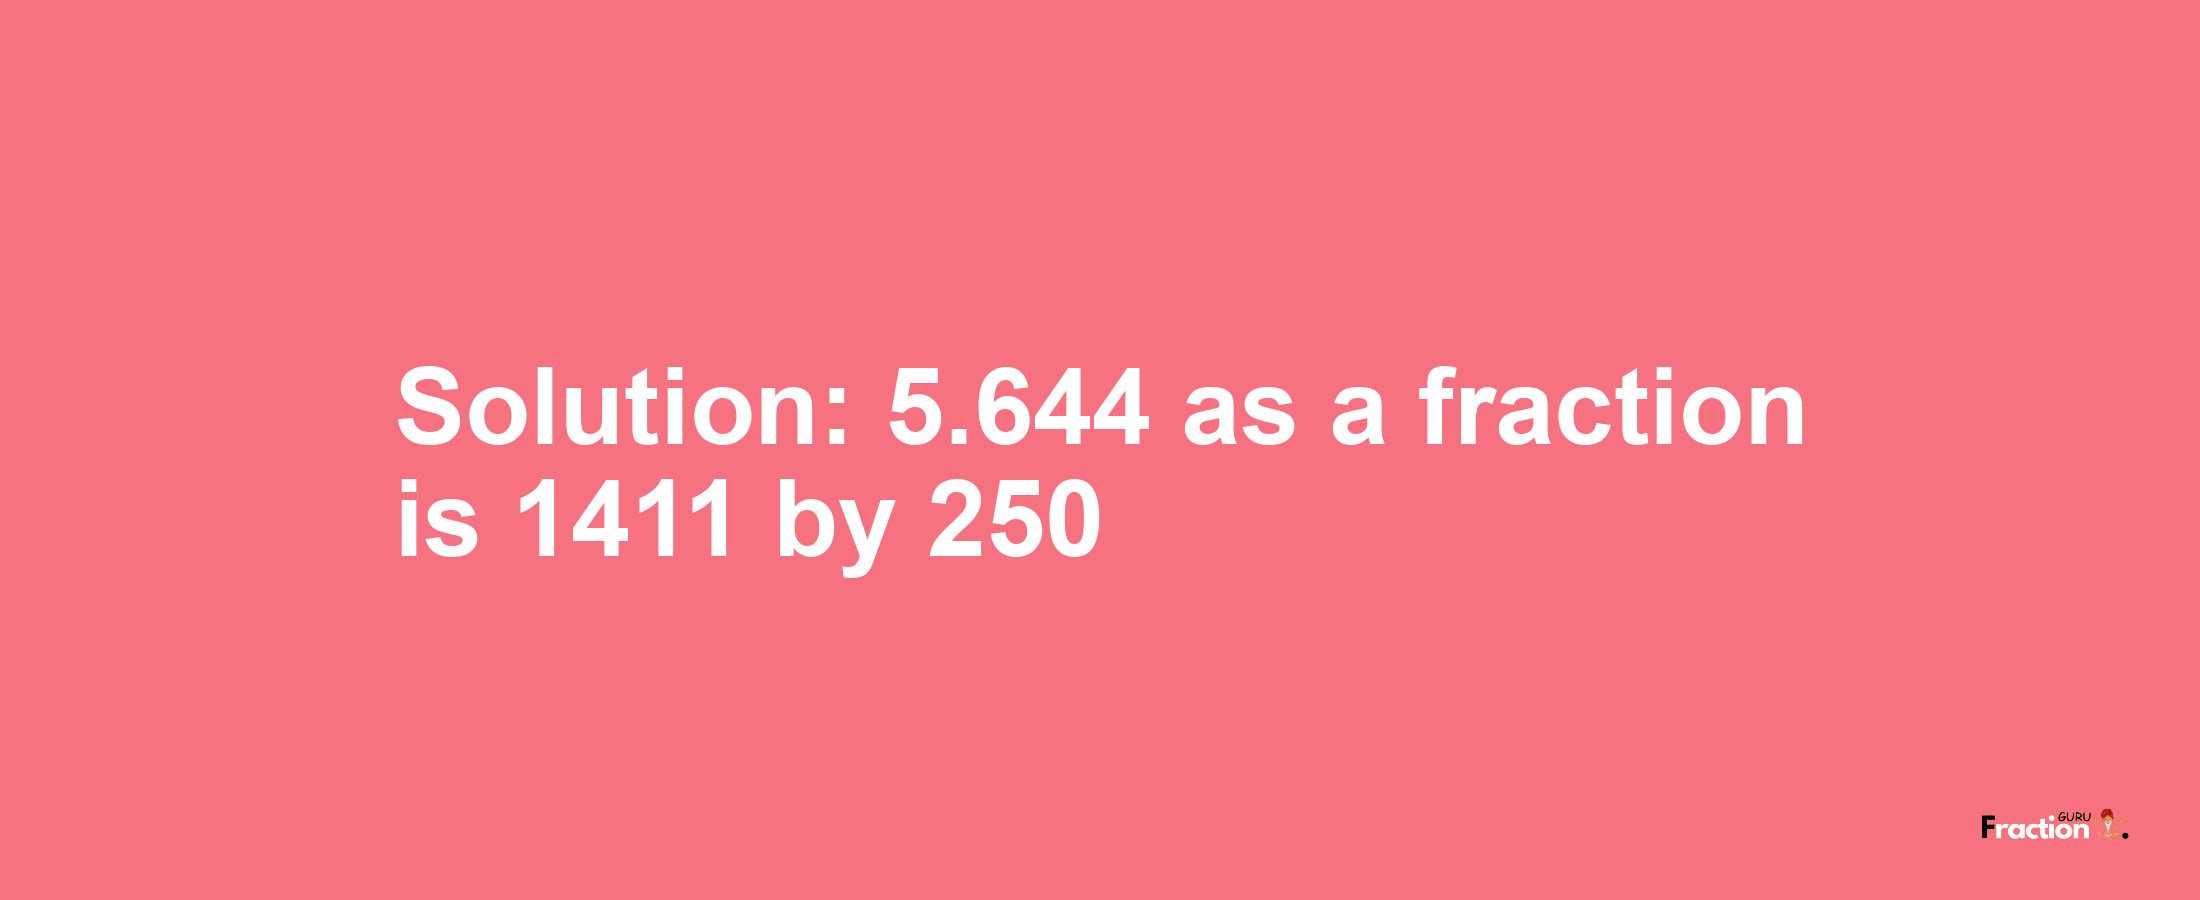 Solution:5.644 as a fraction is 1411/250